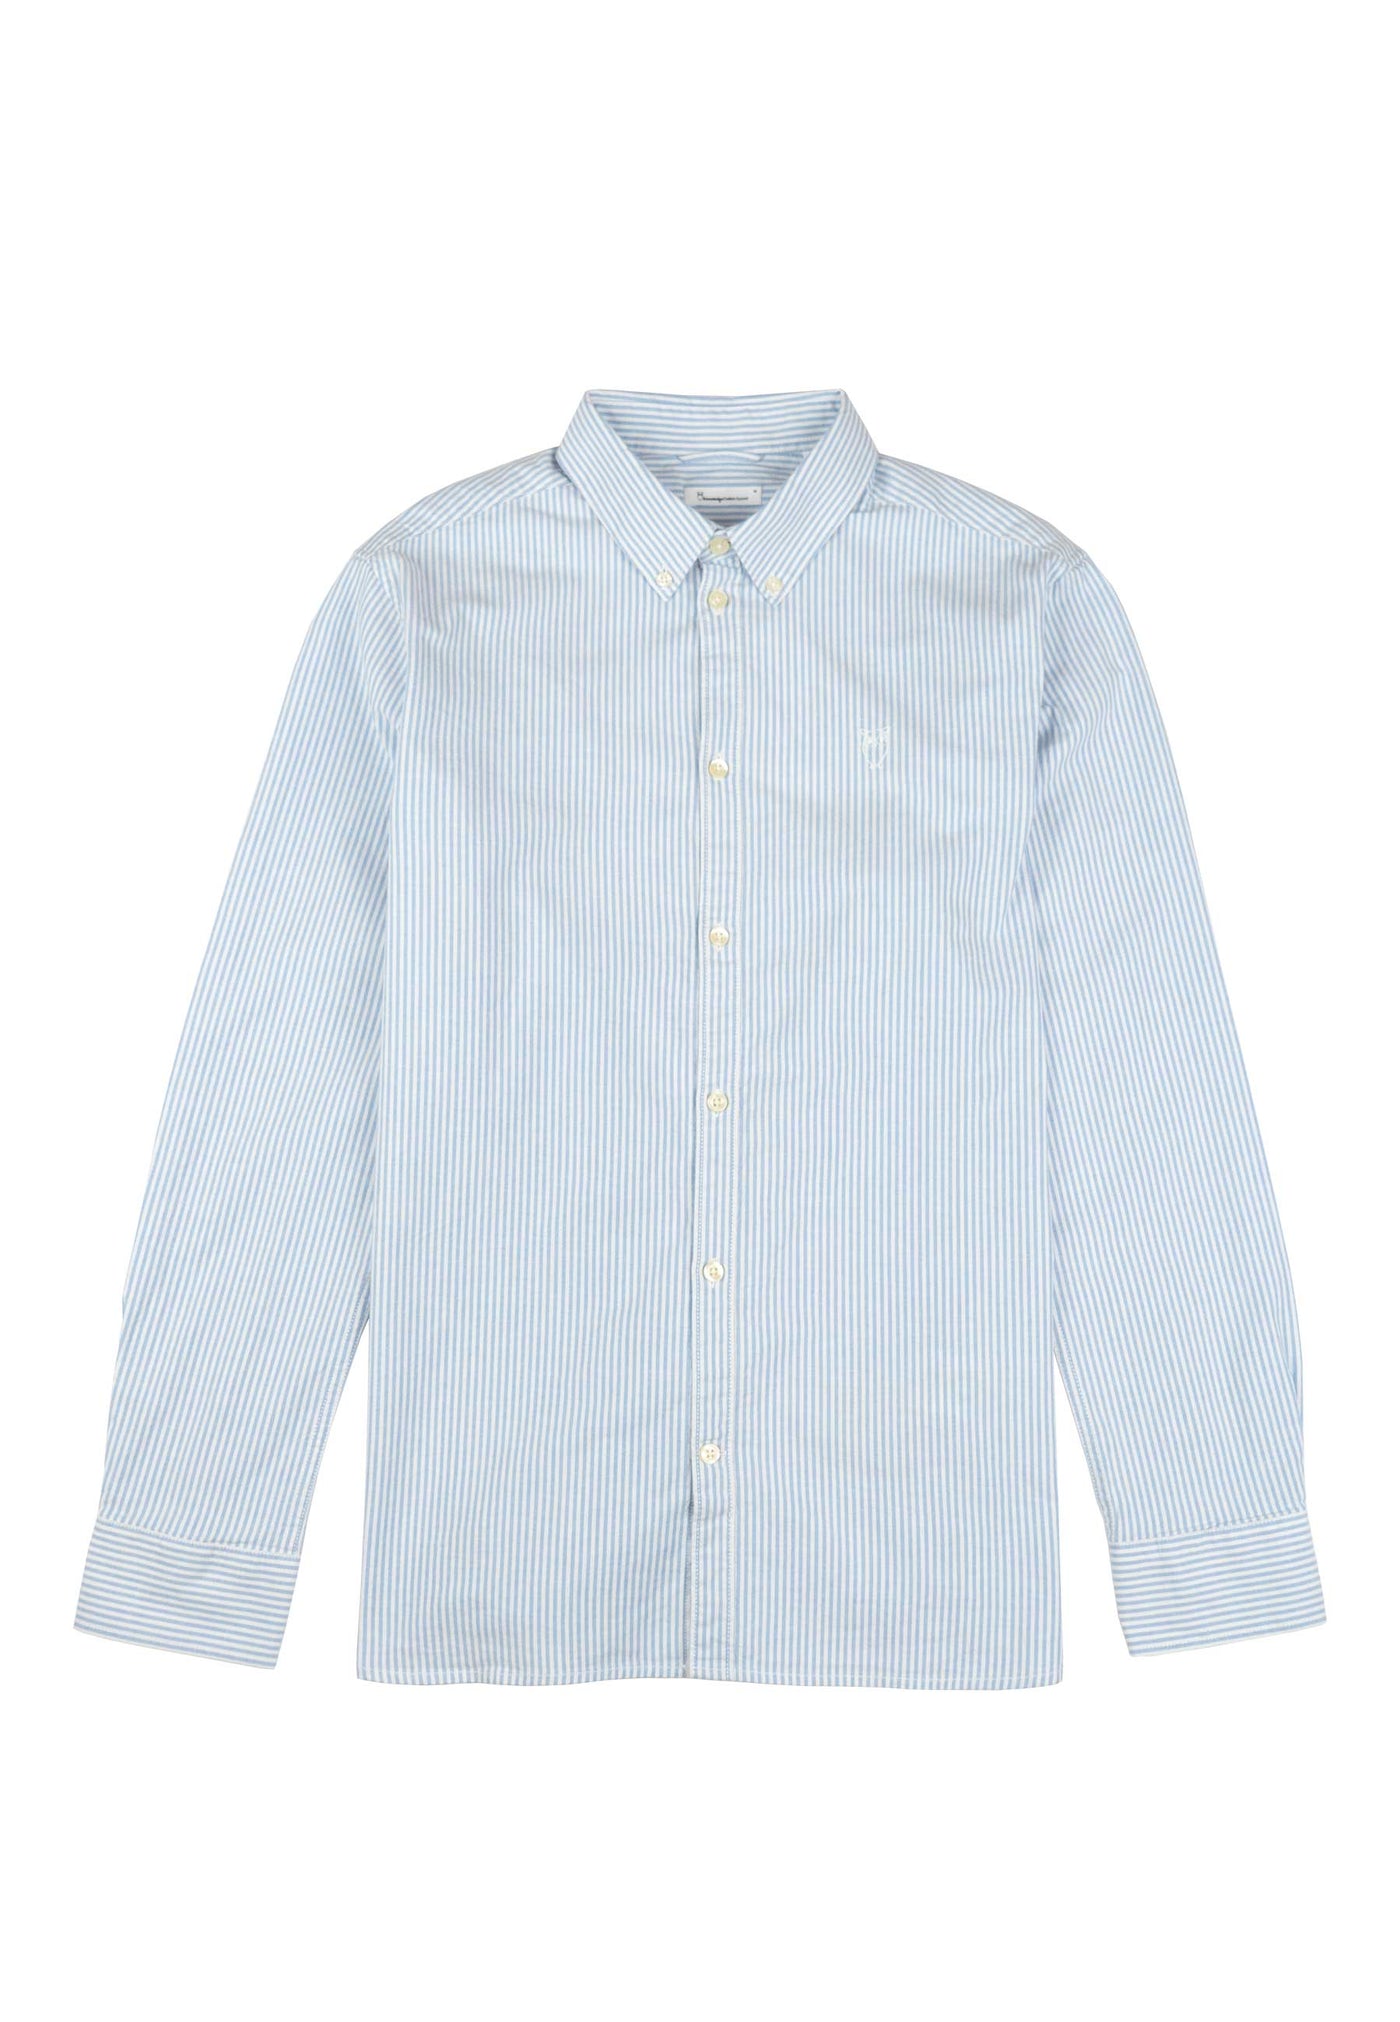 Custom tailored fit striped oxford shirt - Knowledge Cotton Apparel